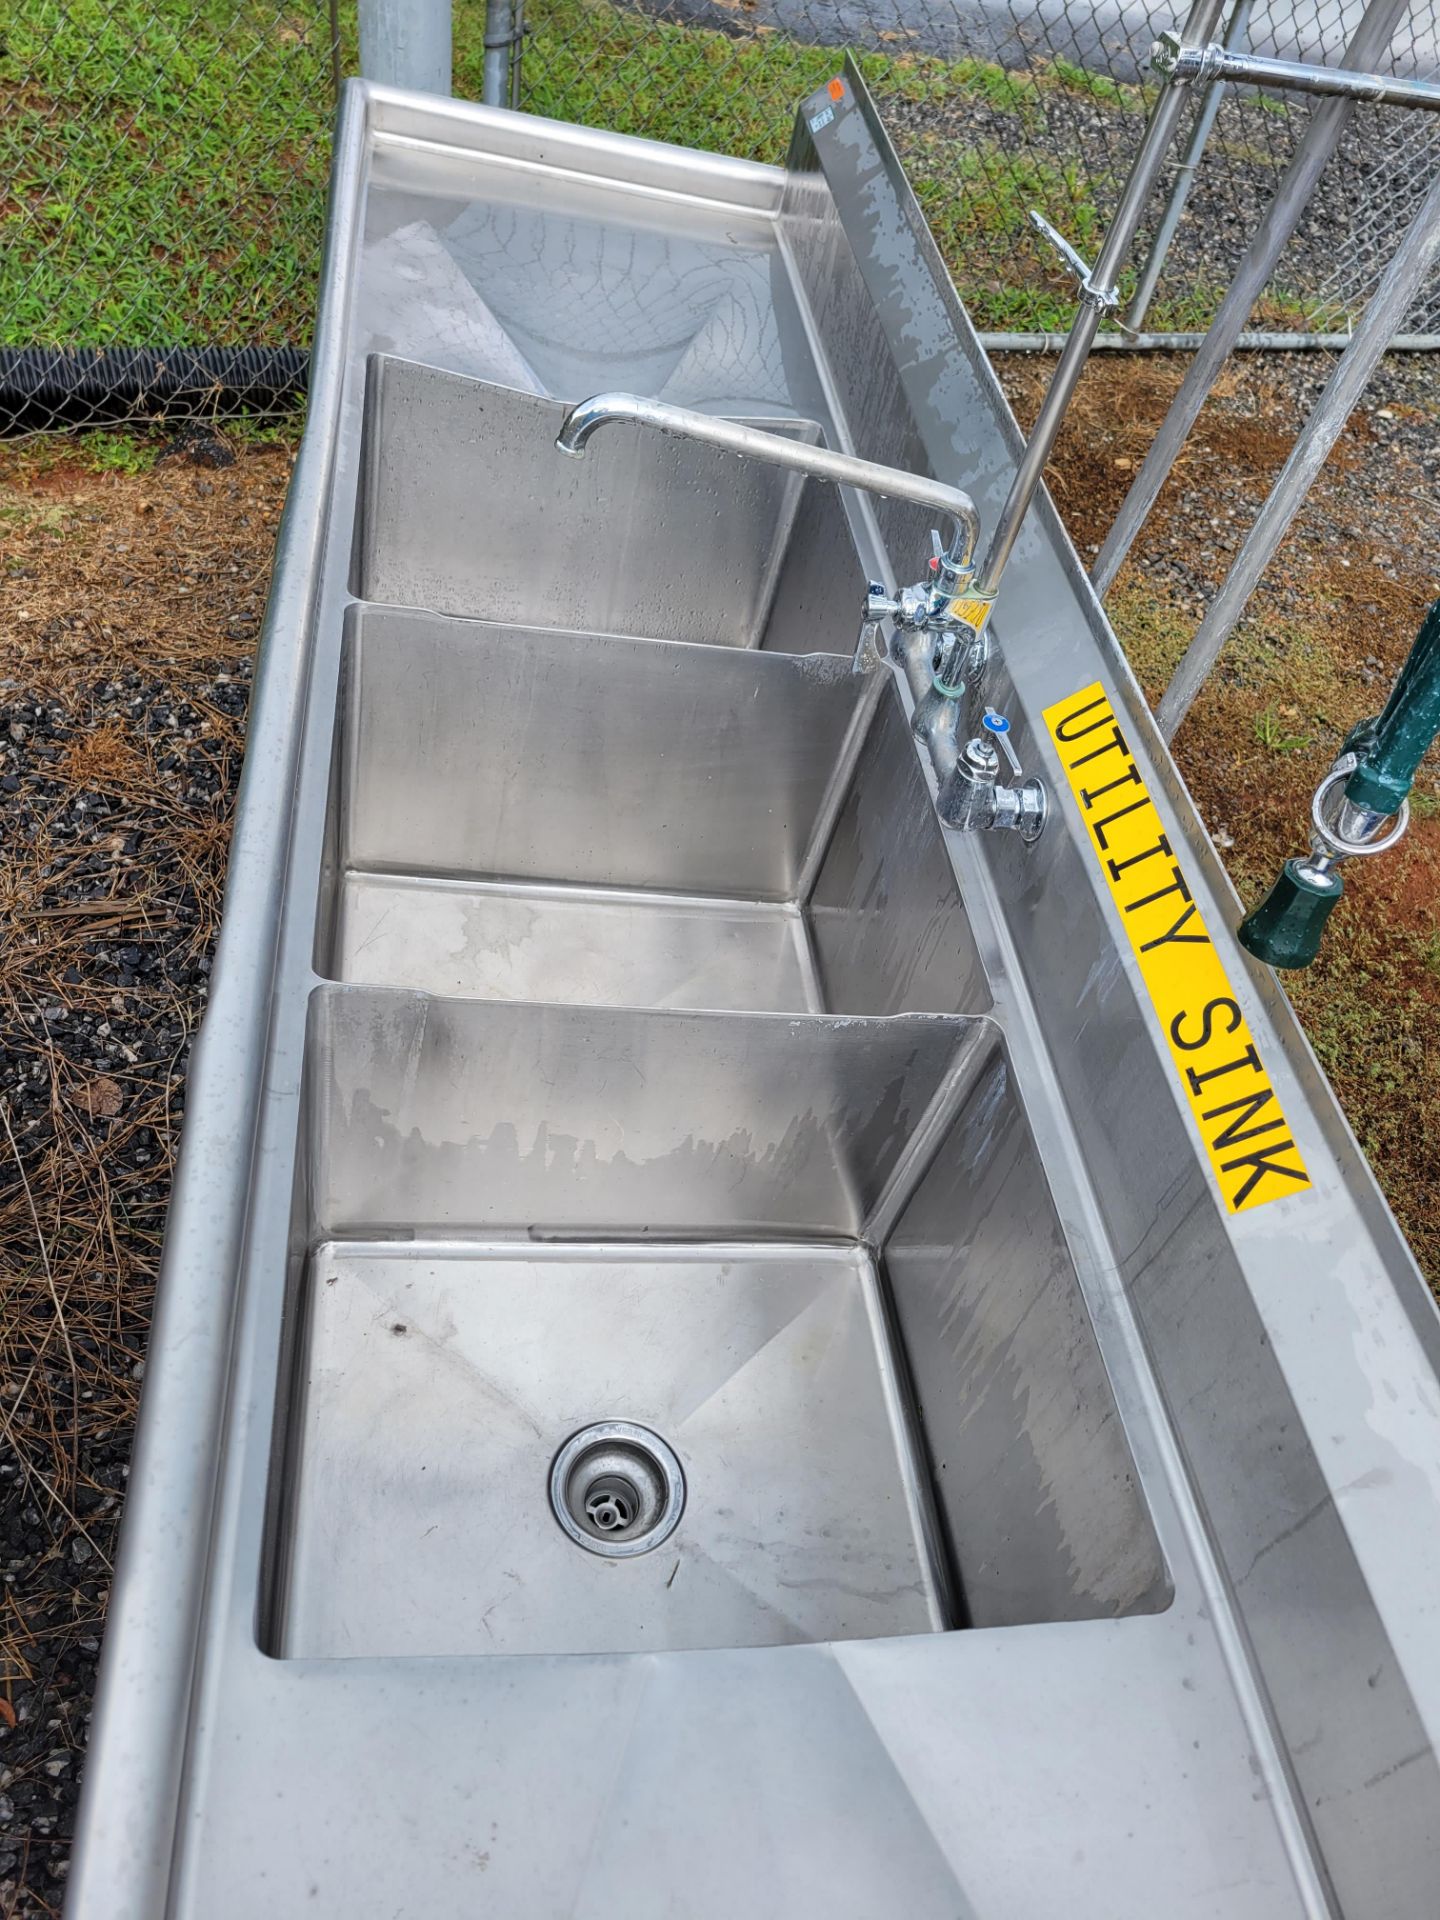 Stainless Steel 3 Bay Utility Sink - Image 2 of 4